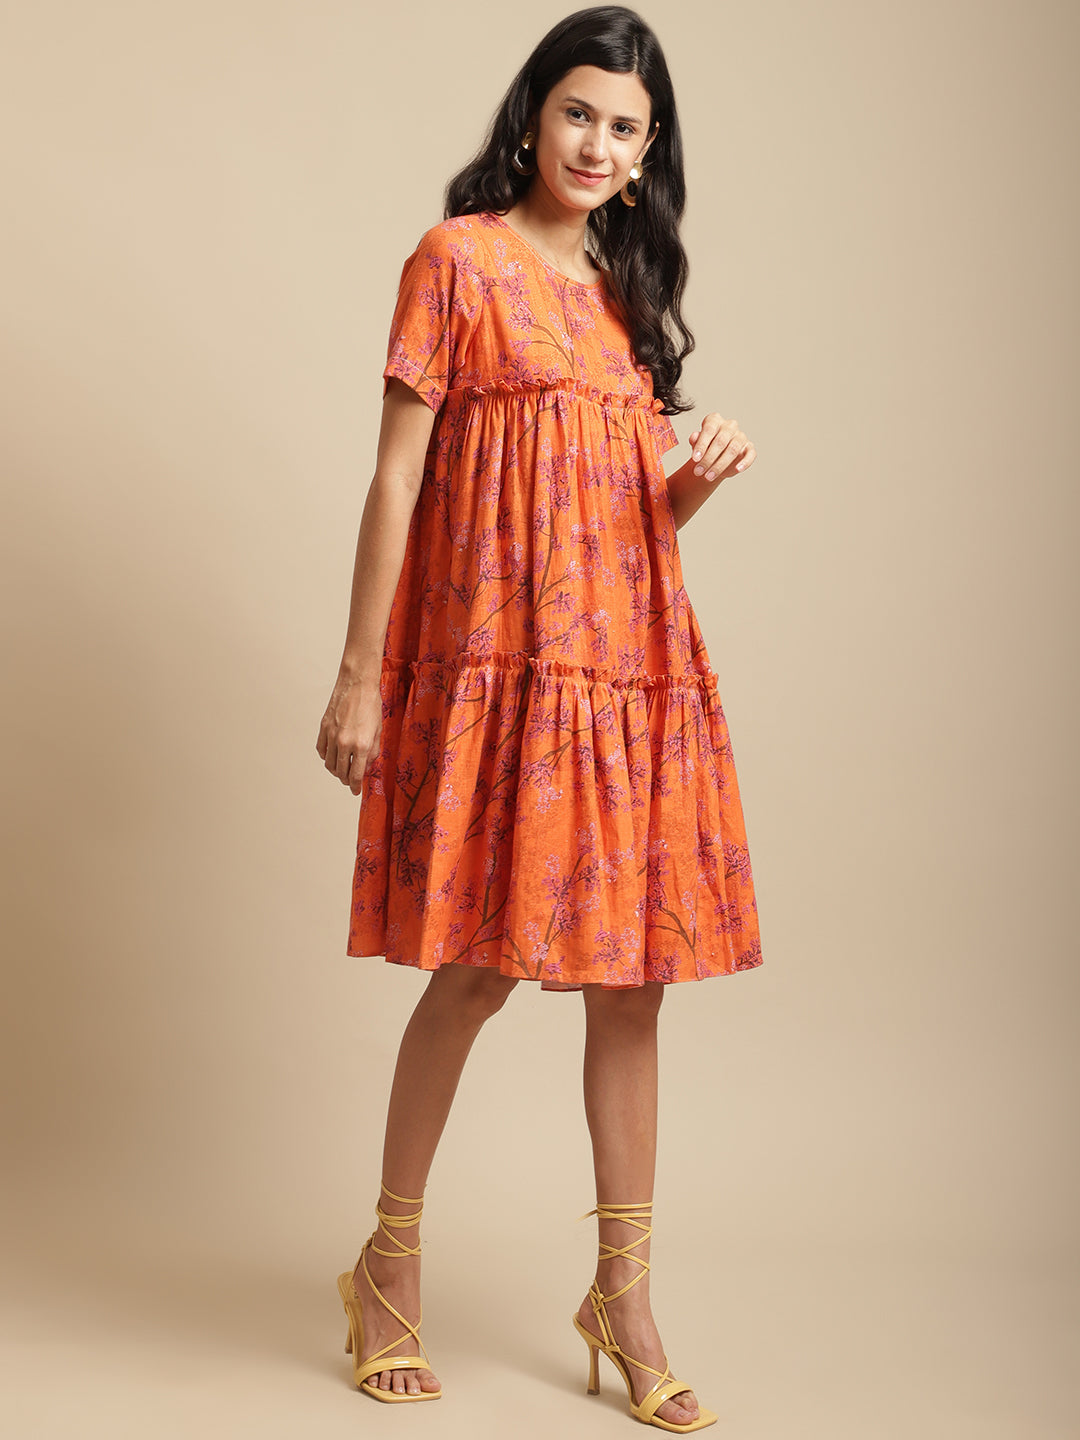 Certified Hemp Orange A Line Dress at Kamakhyaa by Ewoke. This item is Casual Wear, Festive 23, For Her, Hemp, Mini Dresses, Natural with azo free dyes, Orange, Prints, Relaxed Fit, Tiered Dresses, Womenswear